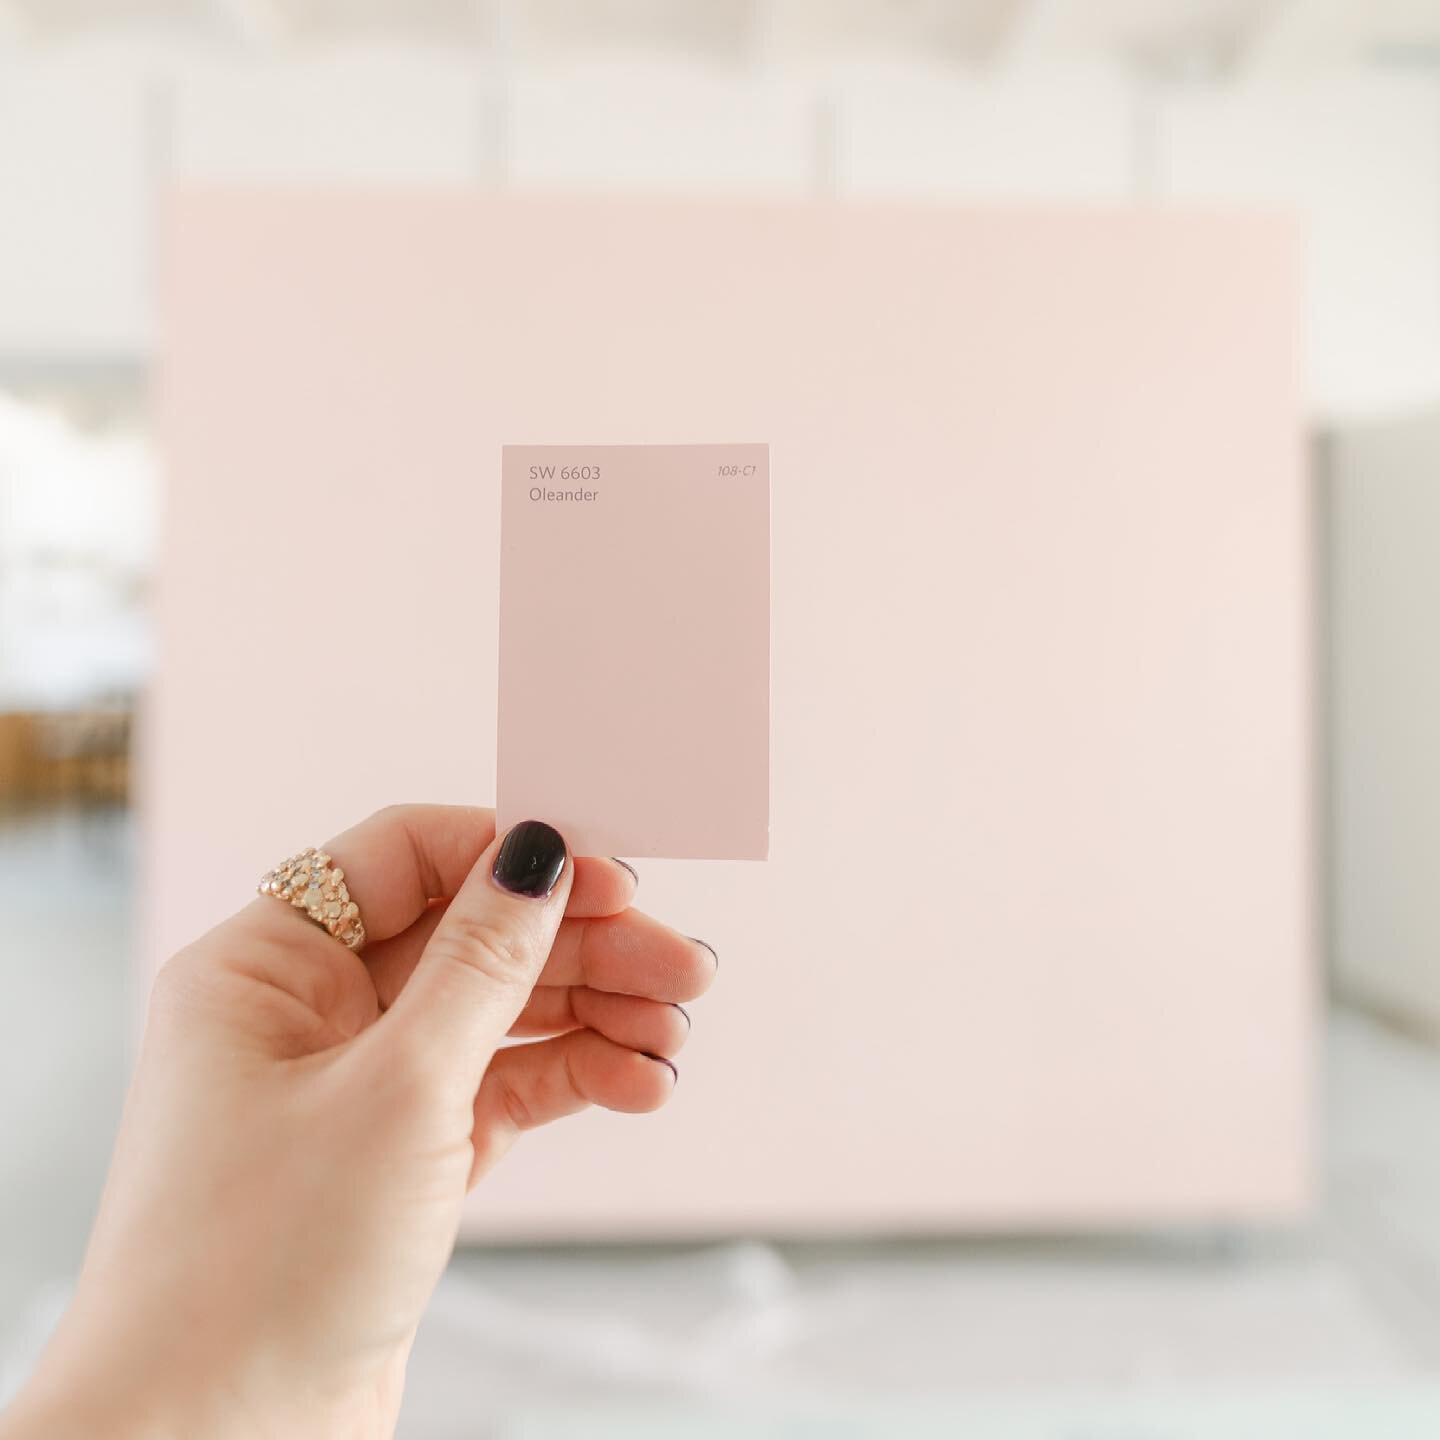 getting ready to welcome S P R I N G with this pretty blush color on the rolling wall 🌸
.
but fans of emerald green, fear not!  We loved the color so much we&rsquo;re painting a vflat with the leftover, so you you can still shoot it!